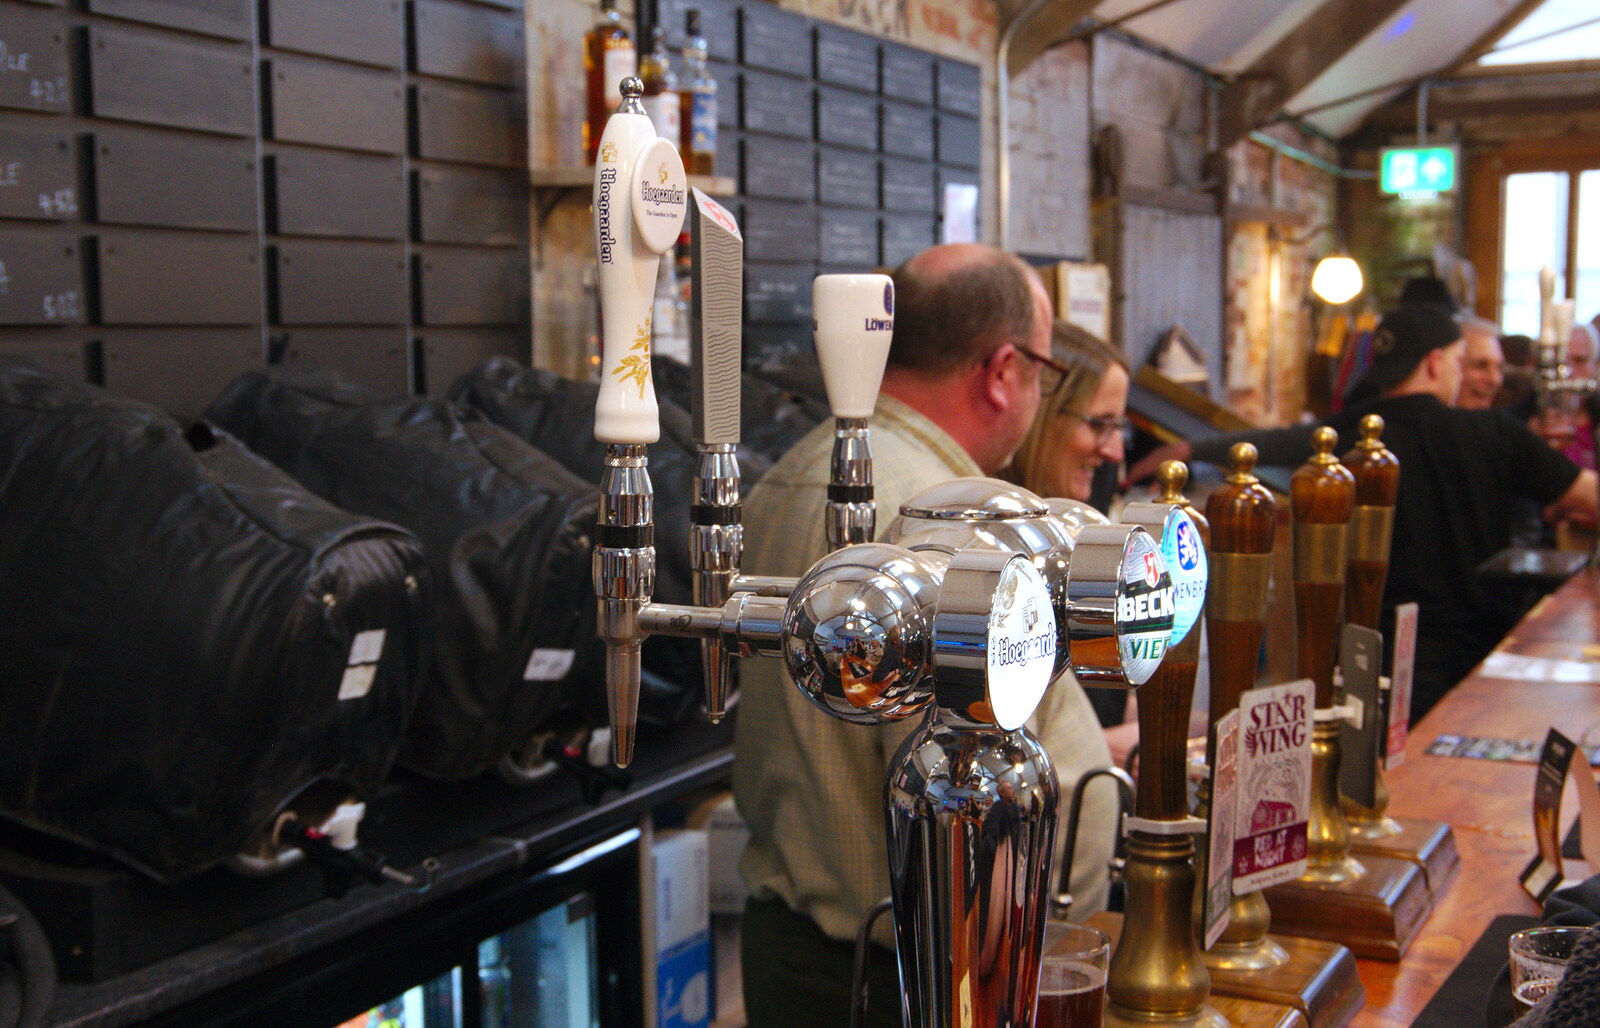 Beer pumps on the bar from The Opening of Star Wing Brewery's Tap Room, Redgrave, Suffolk - 4th May 2019